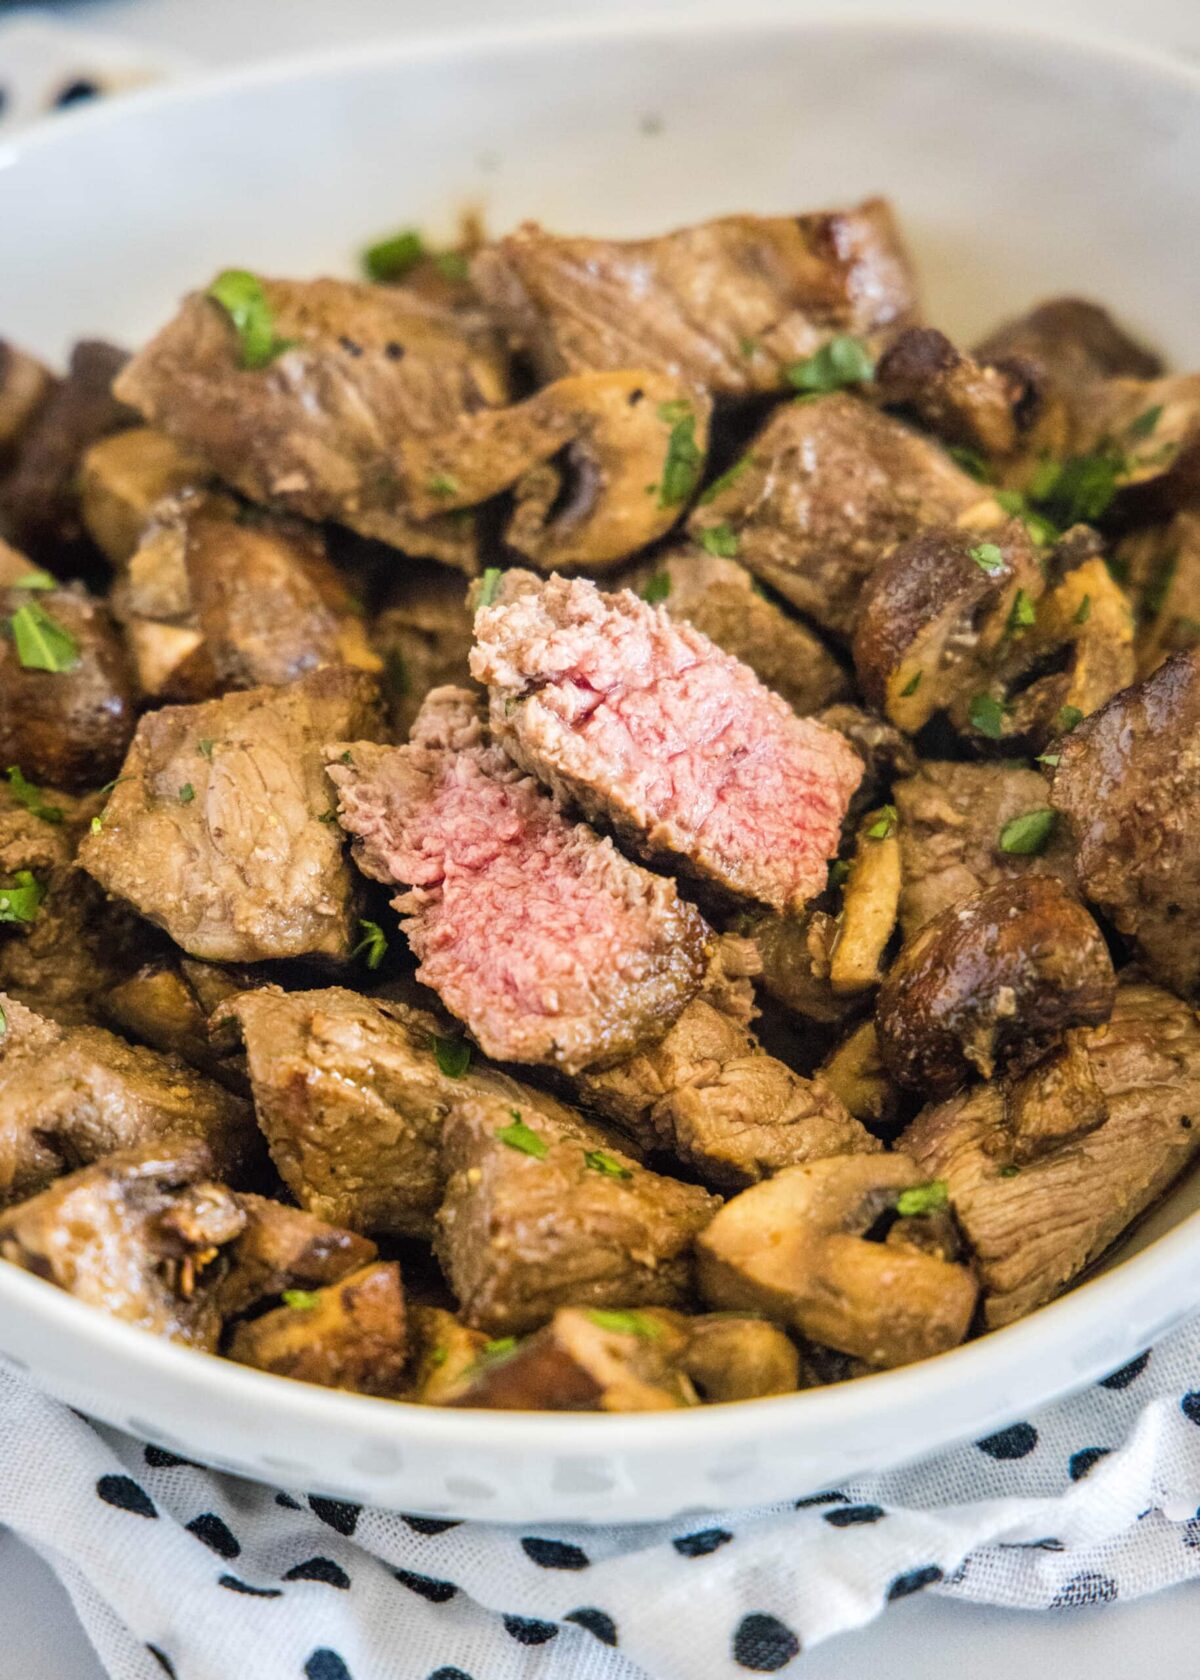 A serving bowl full of steak and mushroom bites, with one of the pieces of steak cut in half